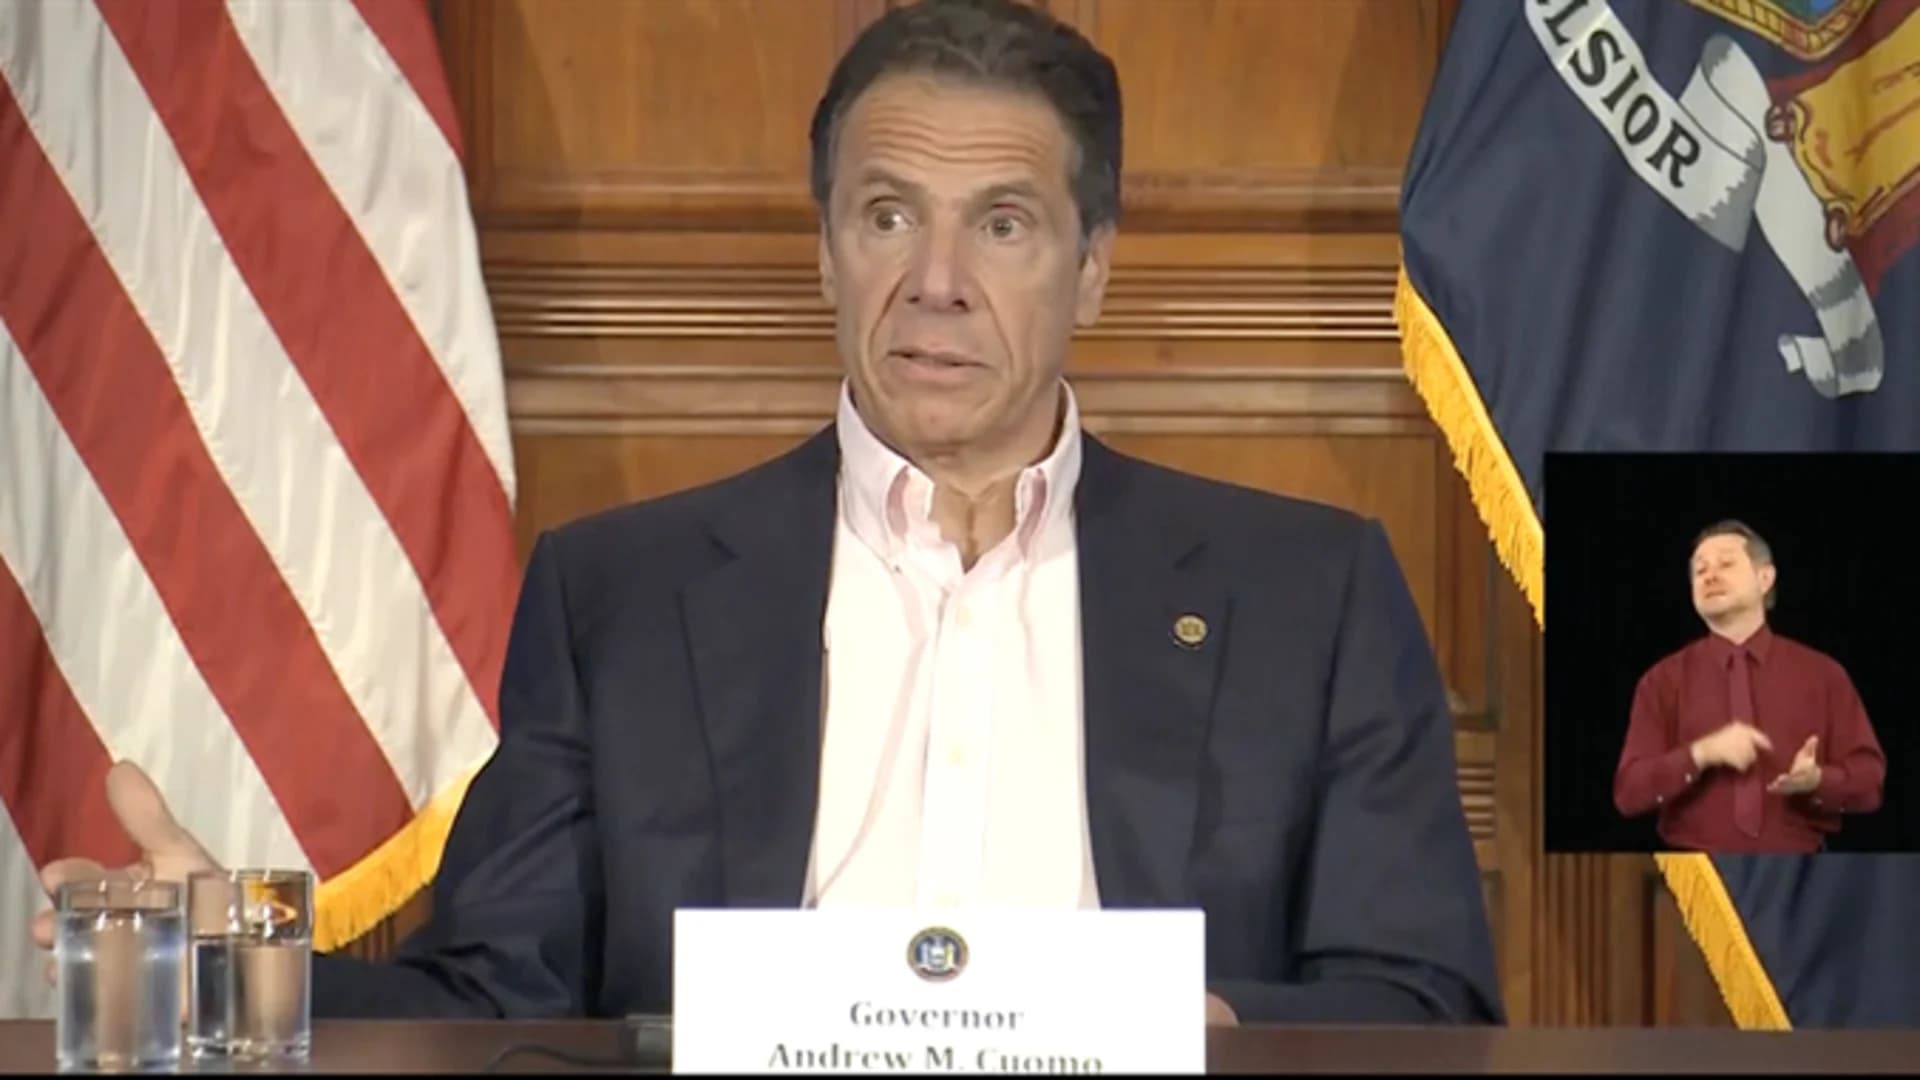 Cuomo urges US Senate to act on $3 trillion COVID-19 relief bill passed by House